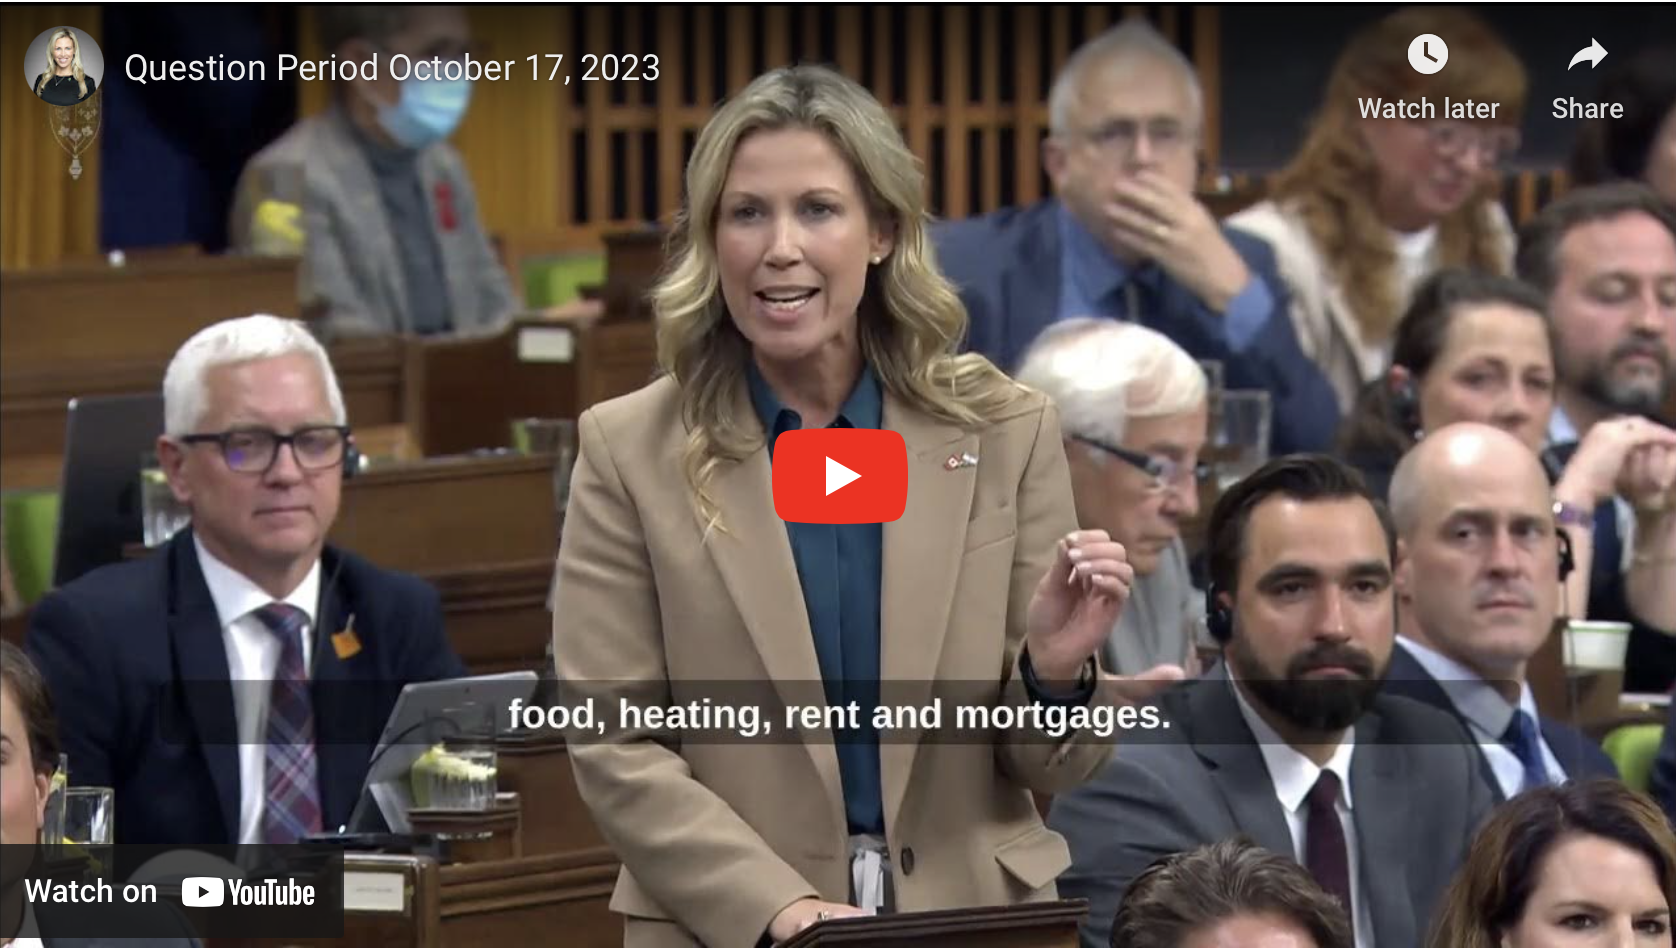 Shelby Kramp-Neuman in question period